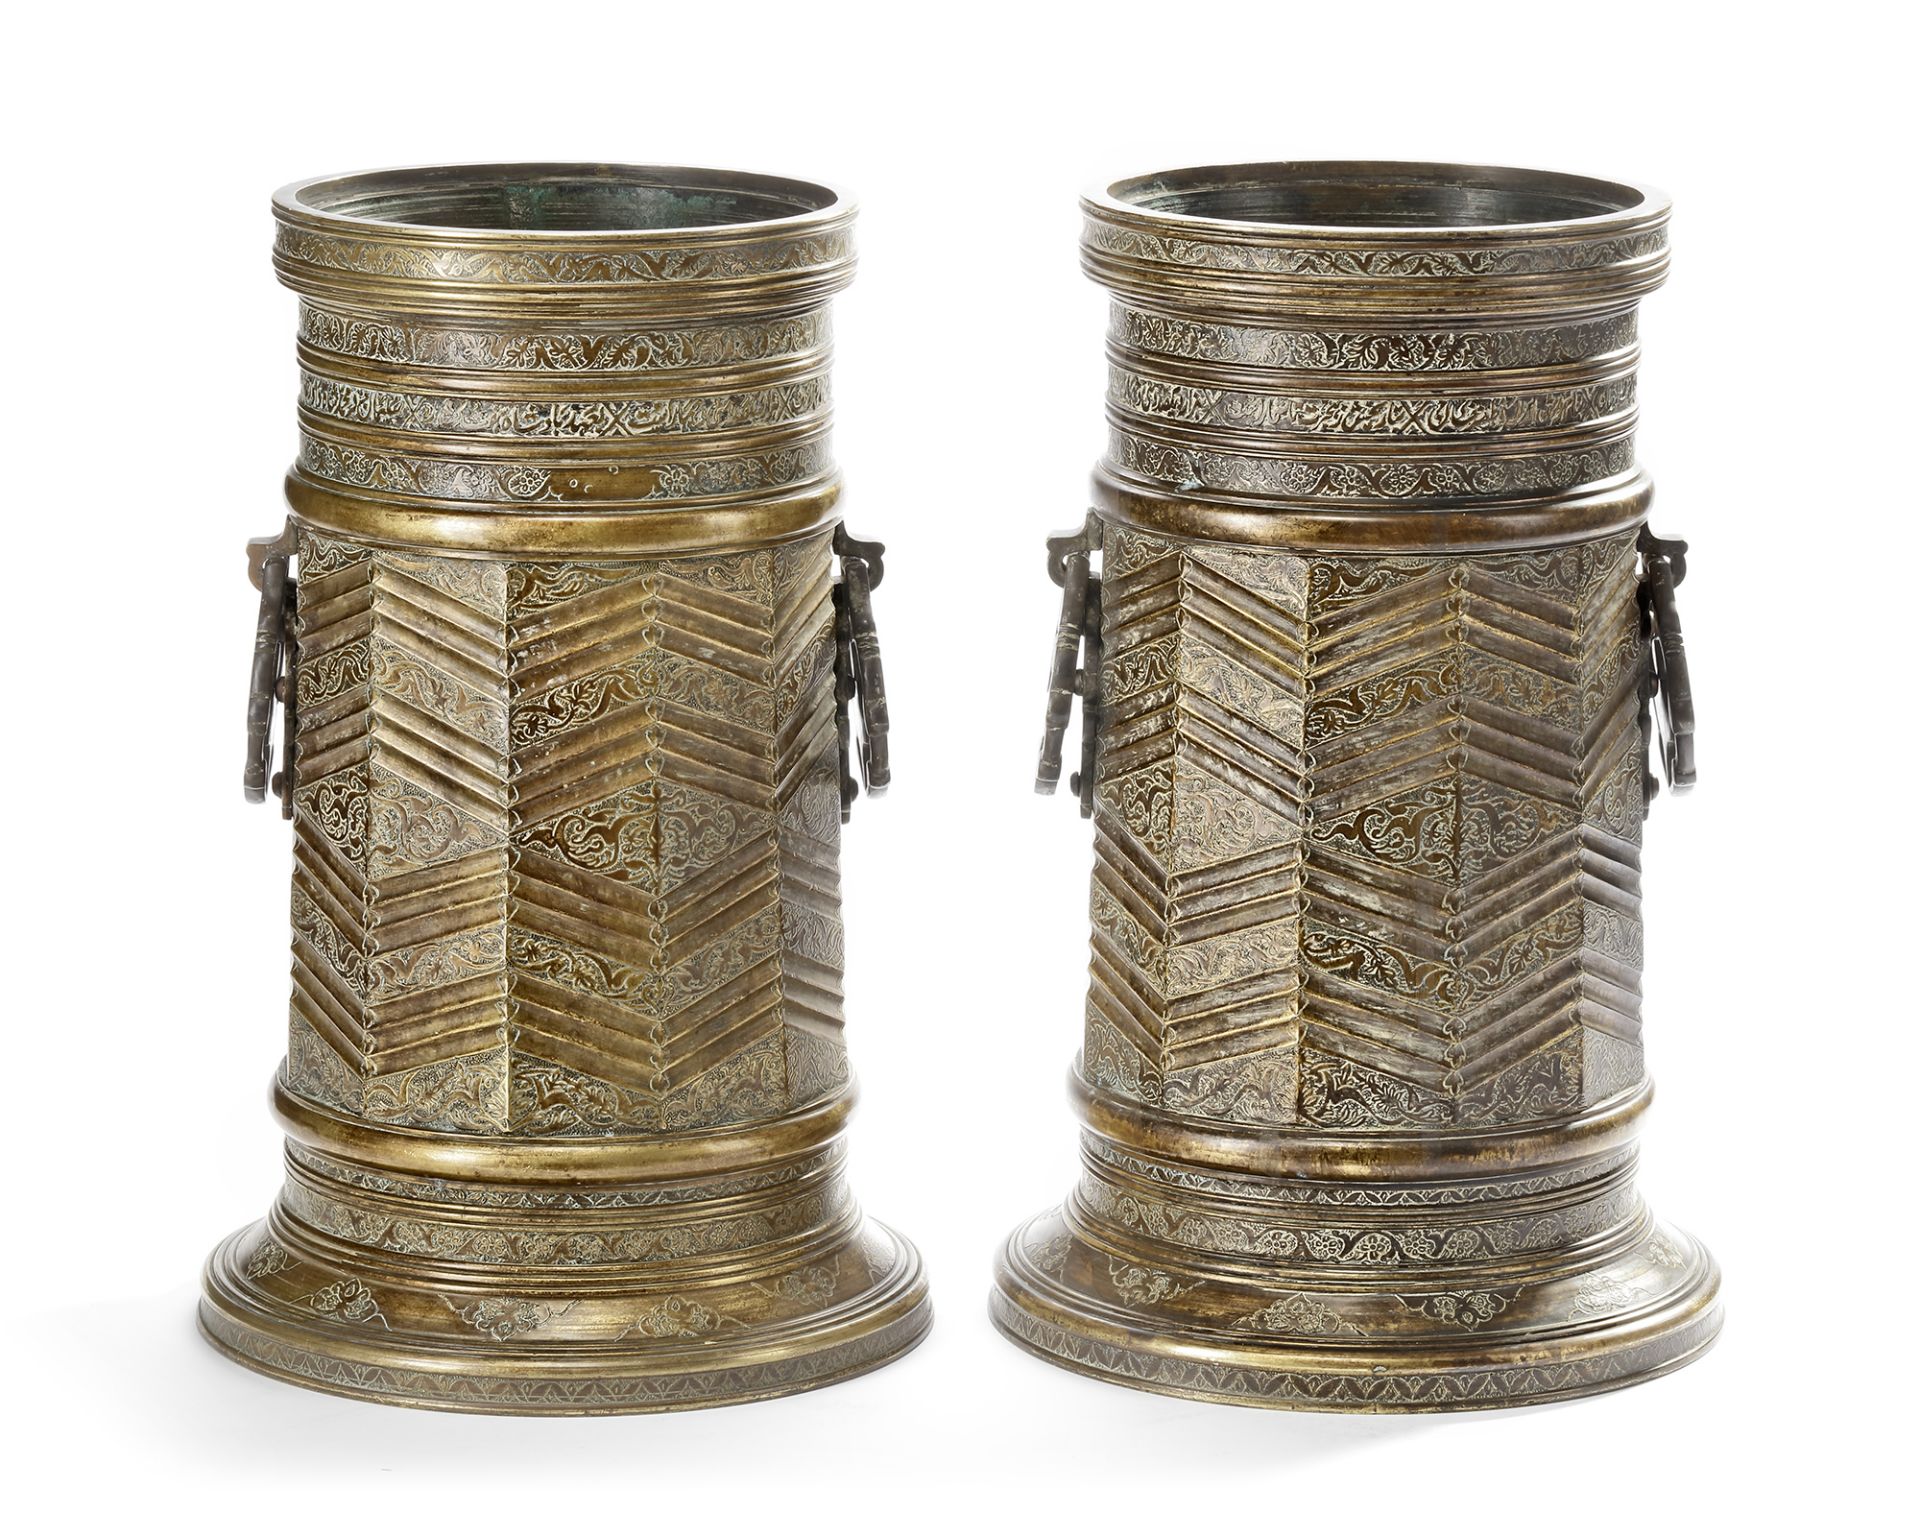 A PAIR LARGE OF SAFAVID STYLE ENGRAVED BRASS TORCH STANDS, PERSIA, 18TH -19TH CENTURY - Image 3 of 6